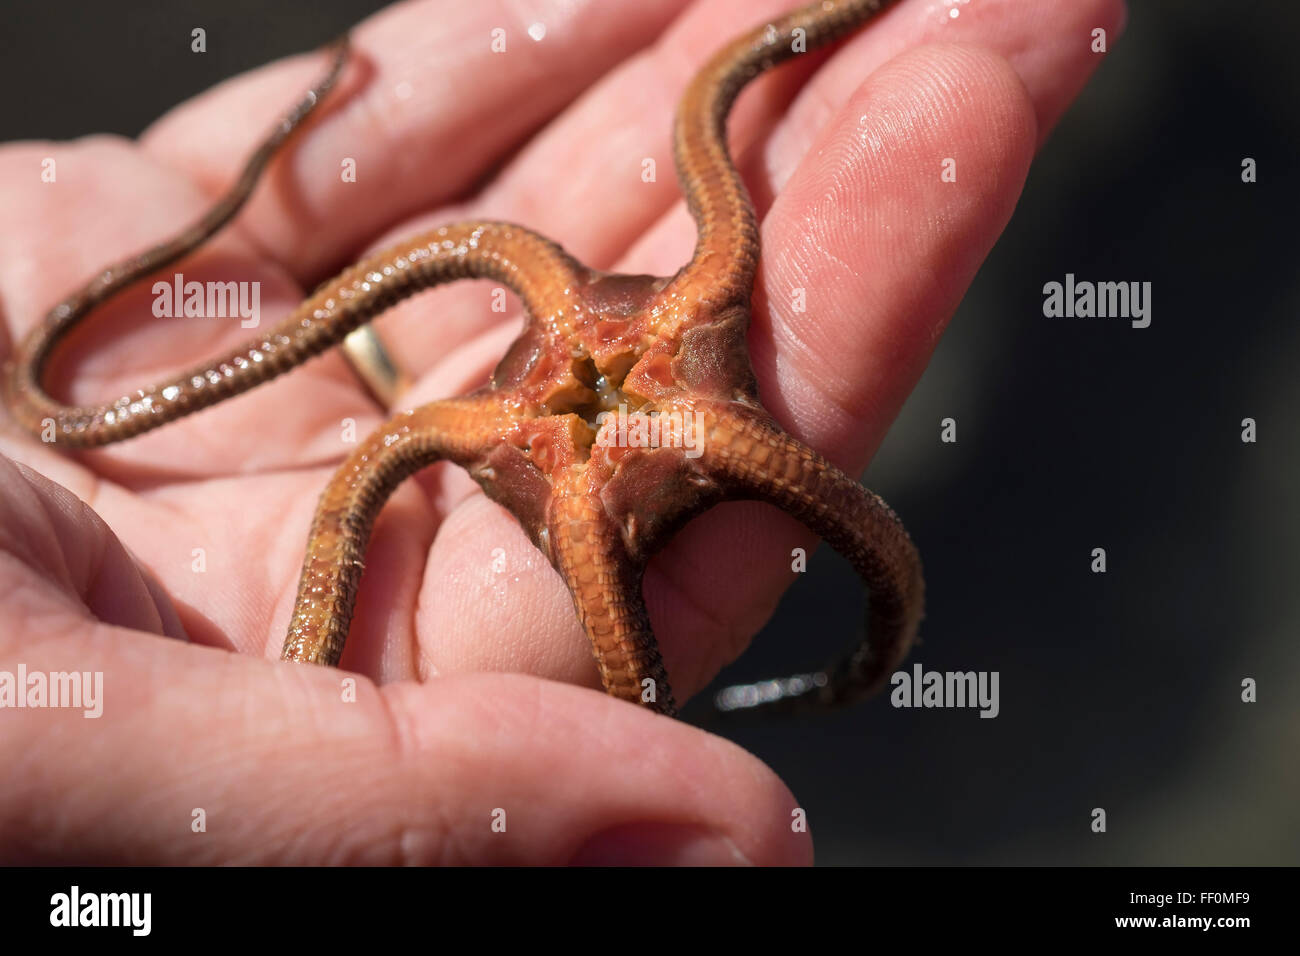 Starfish (Ophioderma longicaudum) with open mouth, in hand, La Gomera, Canary Islands, Spain Stock Photo